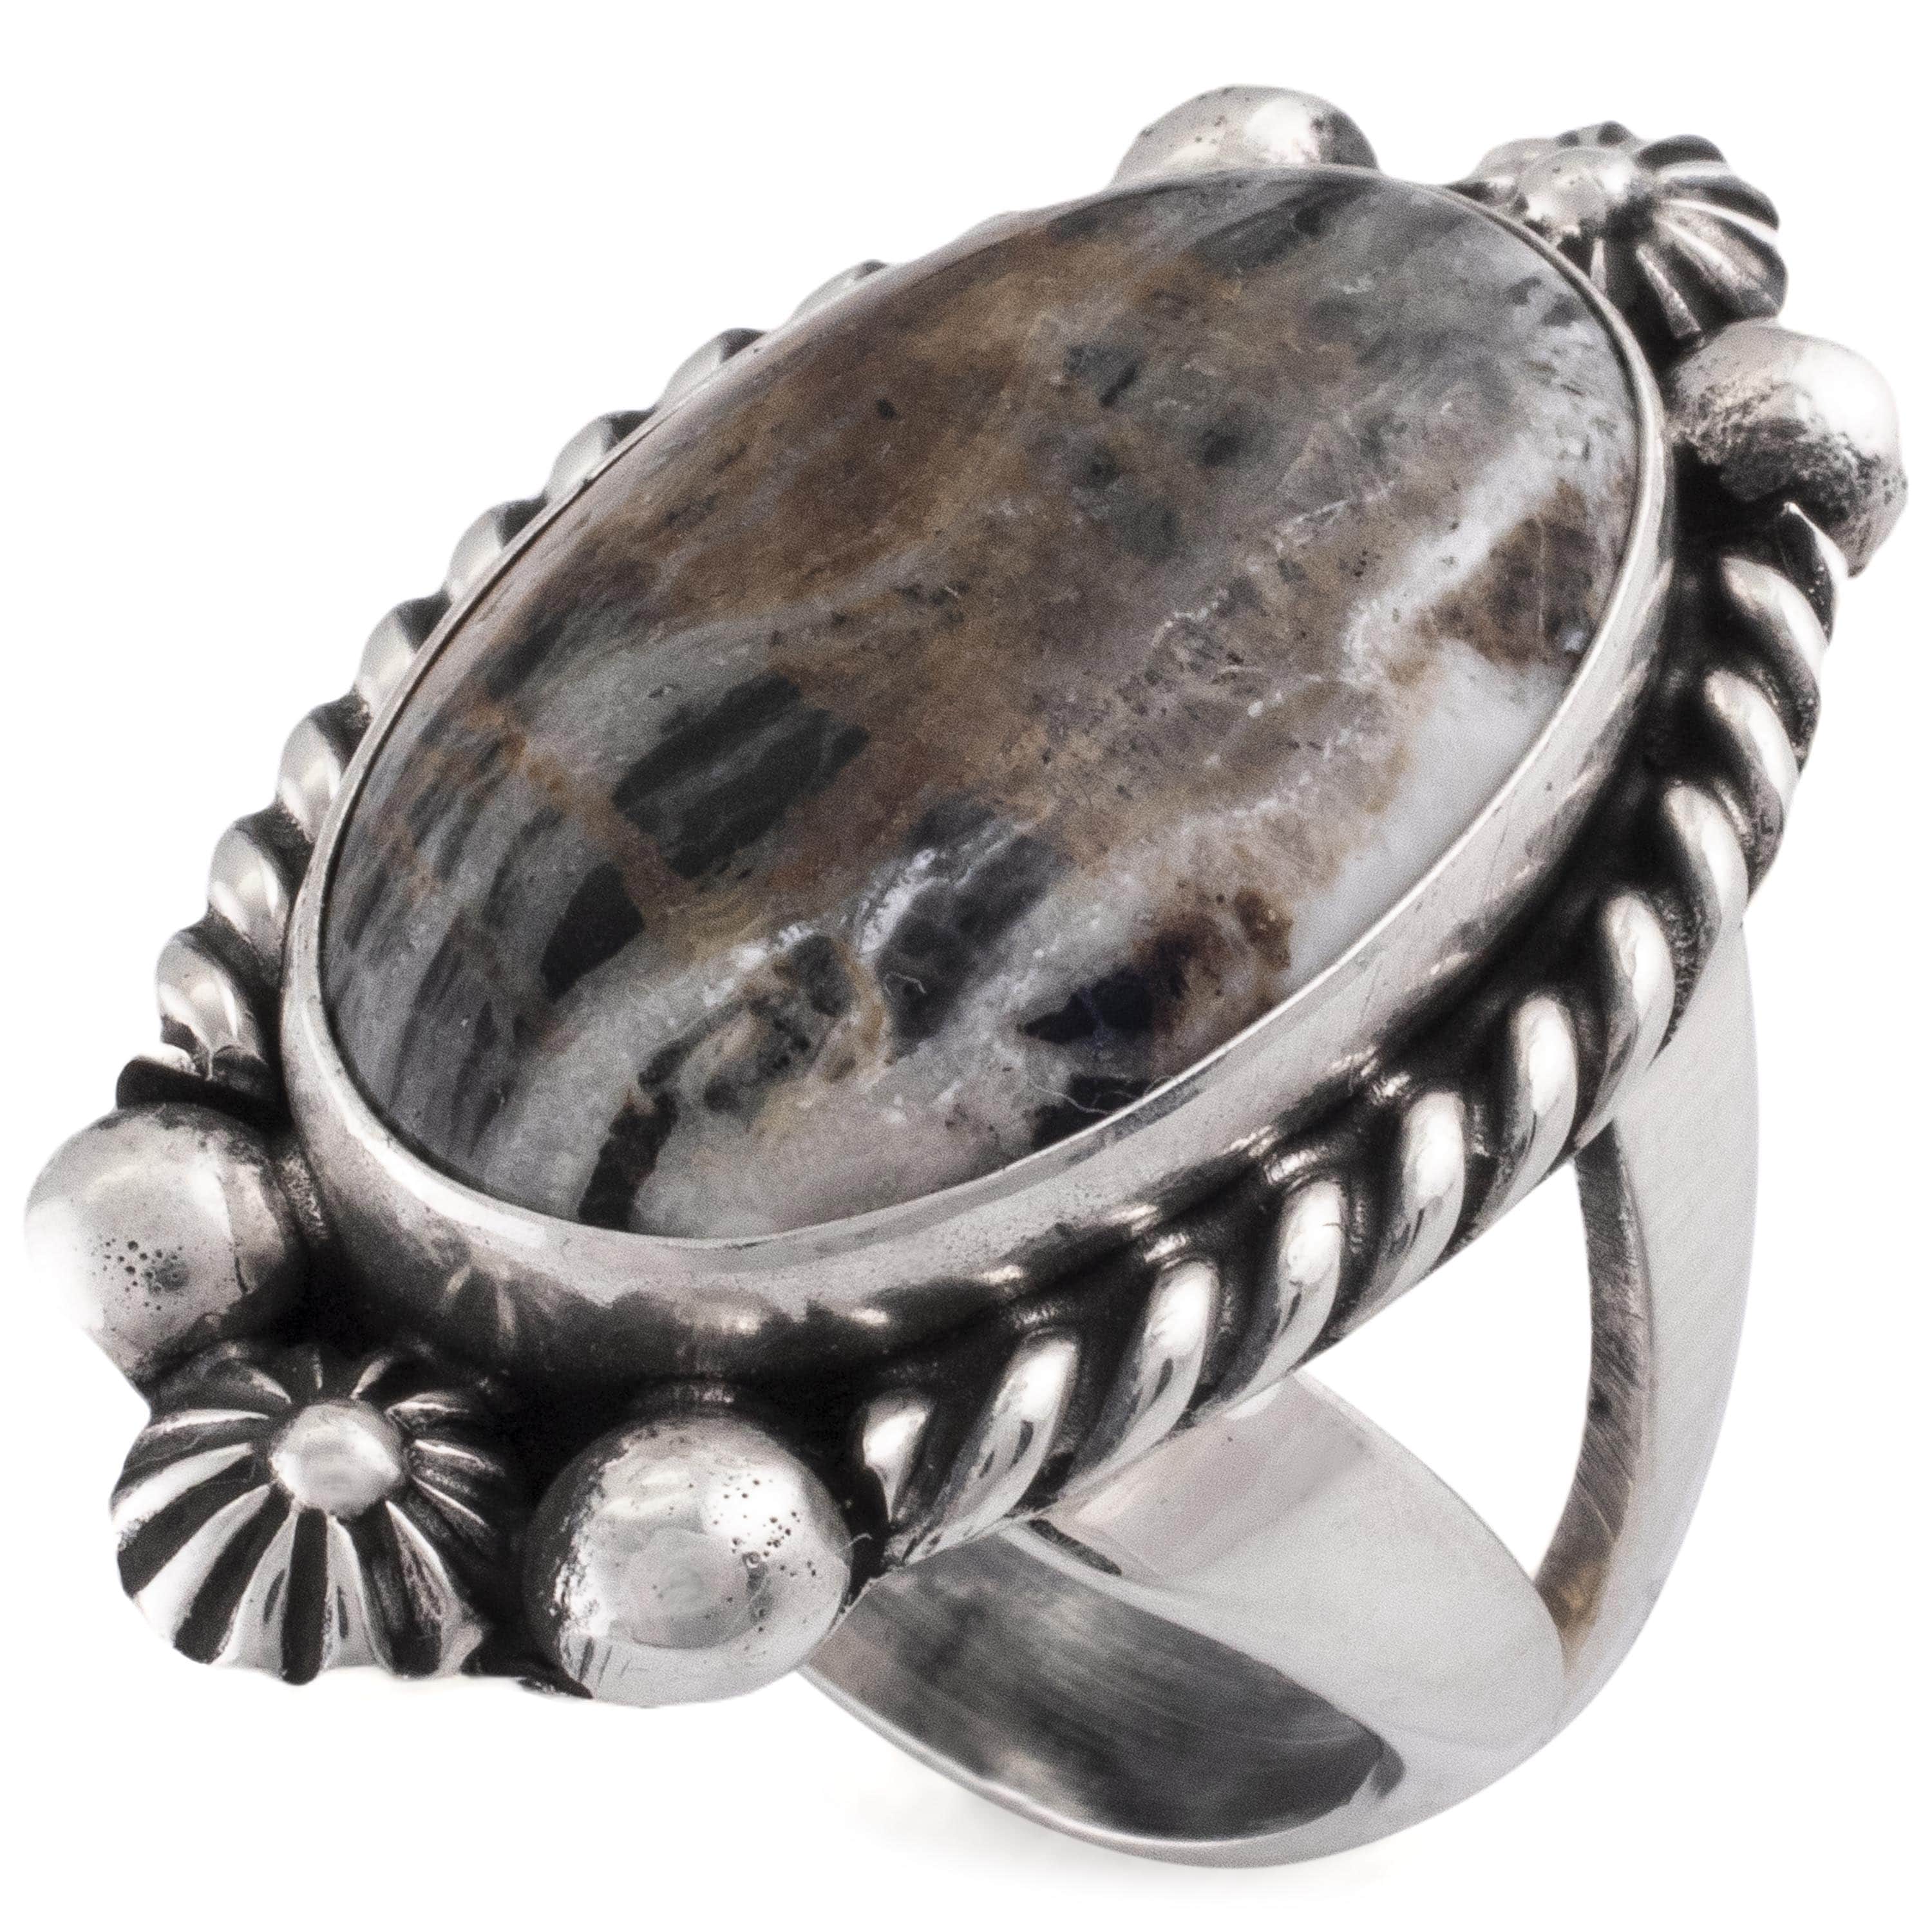 Kalifano Native American Jewelry 8 Eddie Secatero Navajo White Buffalo Turquoise USA Native American Made 925 Sterling Silver Ring NAR800.030.8